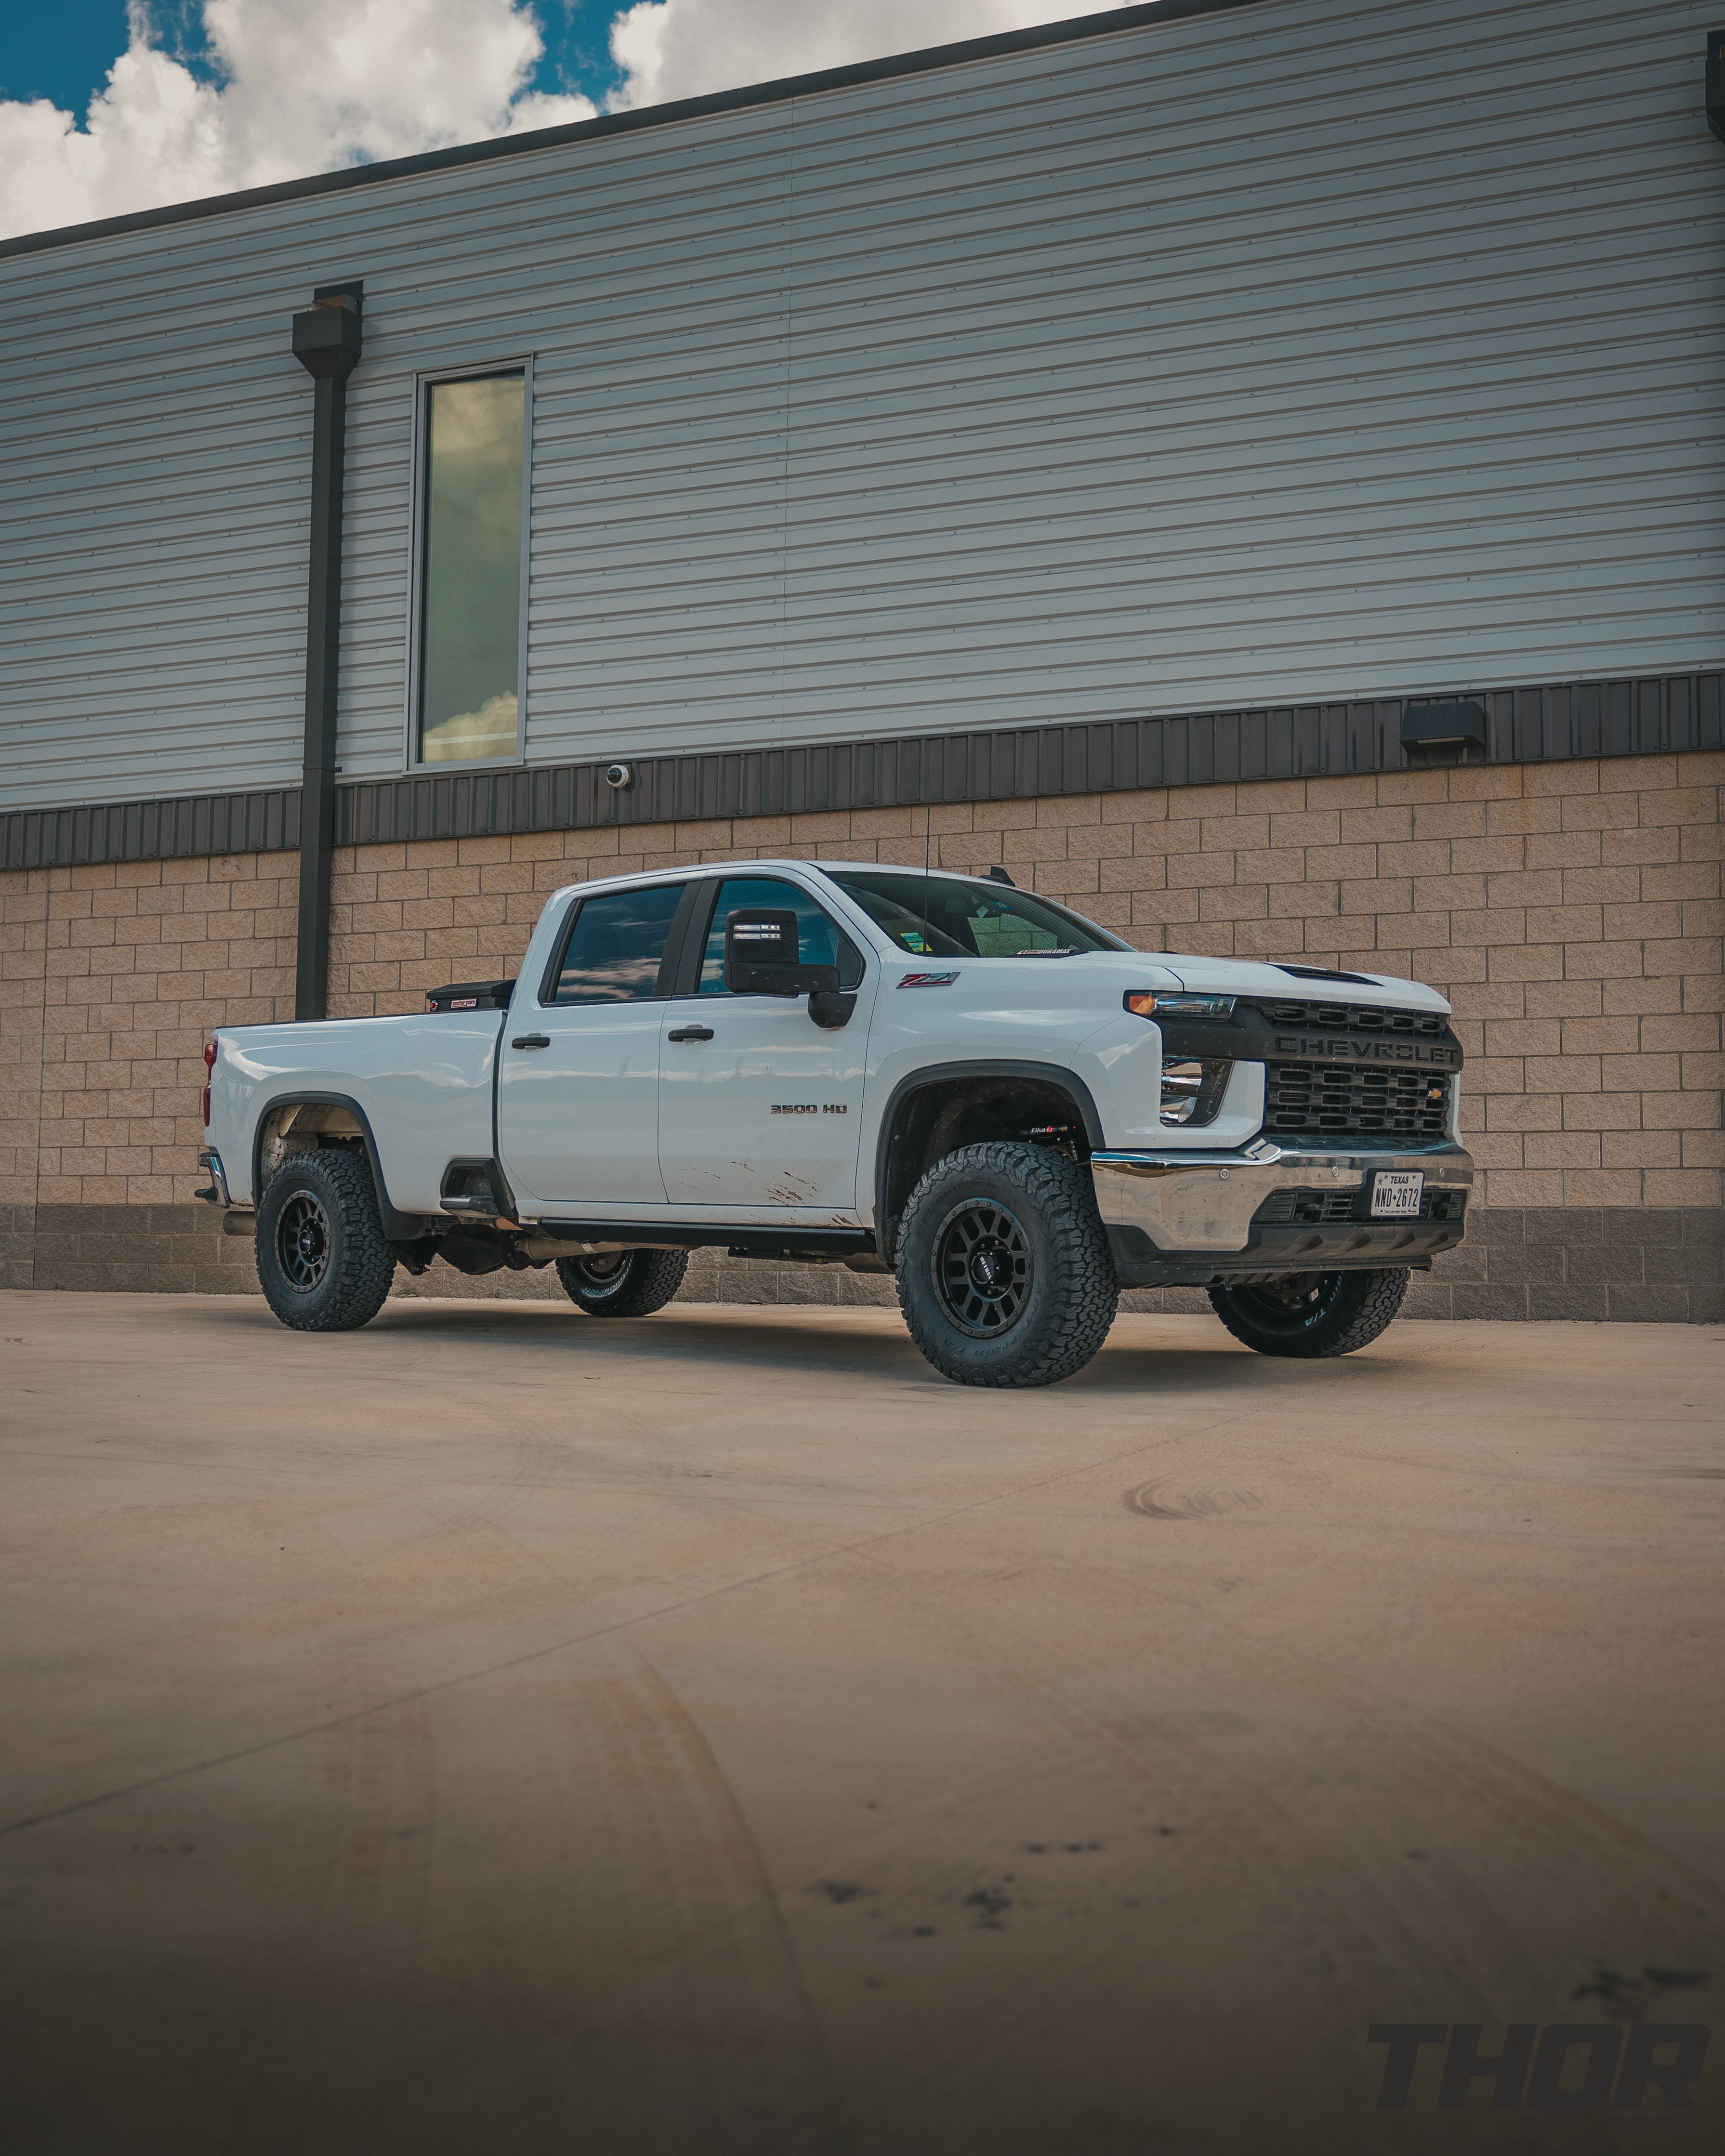 2022 Chevrolet Silverado 2500 HD WT in White with Cognito 3" Elite Suspension Kit with Elka Reservoirs, AMP Research Steps, WeatherGuard Toolbox, Method 18x9" MR309 Matte Black Wheels, 35x12.50R18 BF Goodrich A/T KO2 Tires